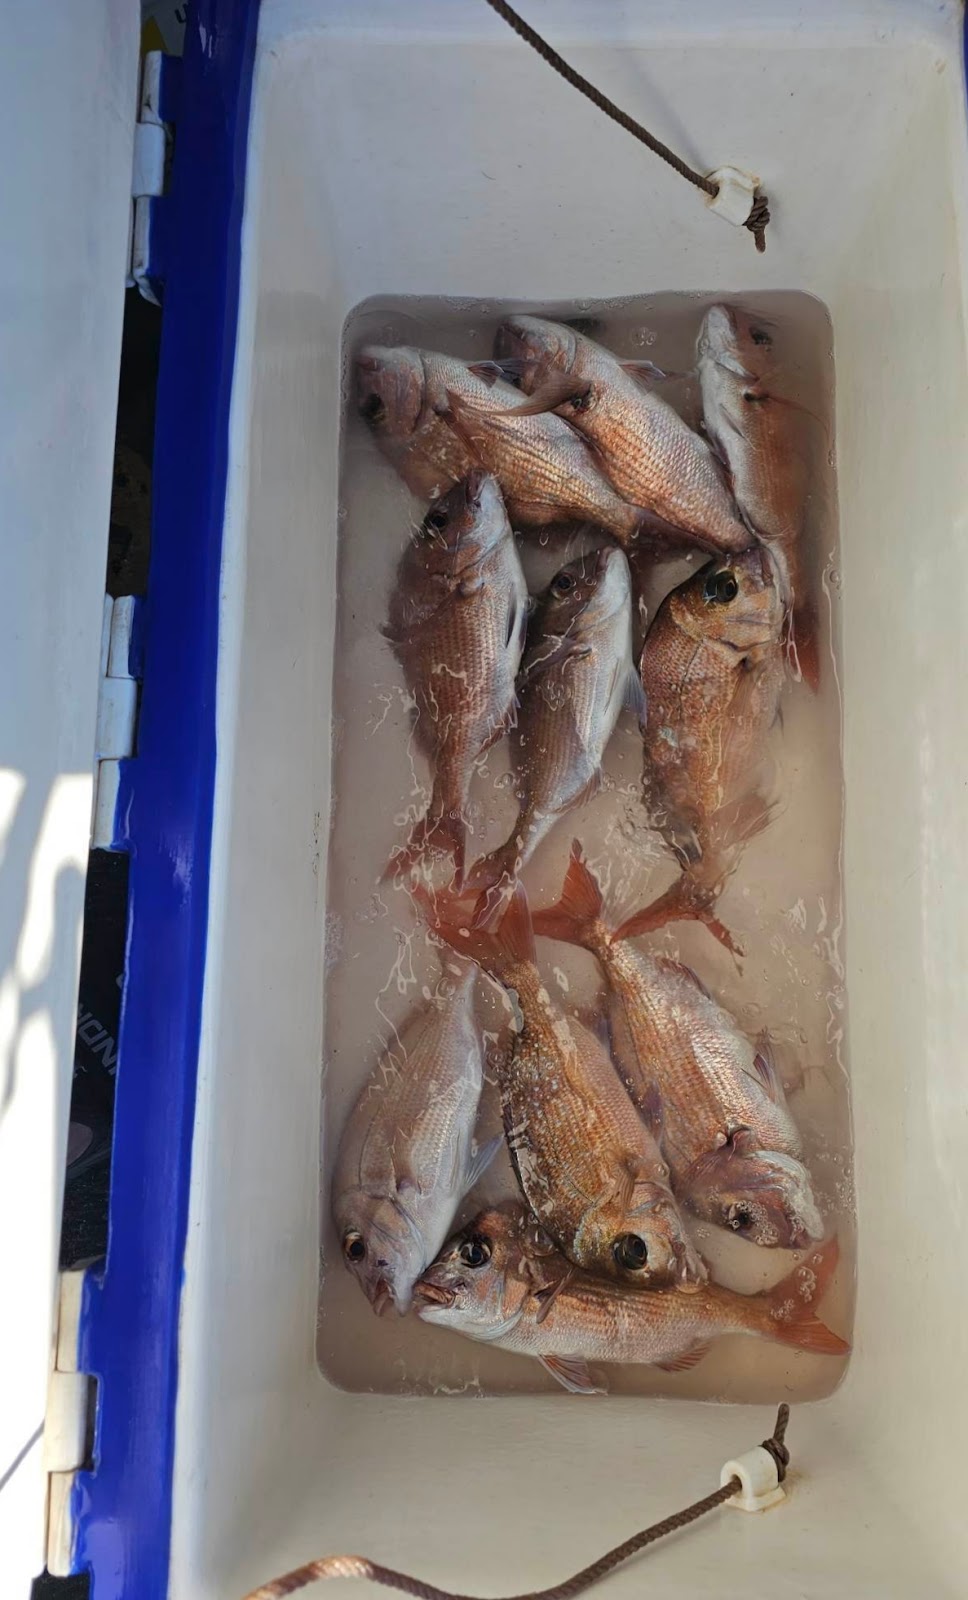 Twilight Fishing Charters |  | 34 The Strand, Williamstown VIC 3016, Australia | 0484189980 OR +61 484 189 980